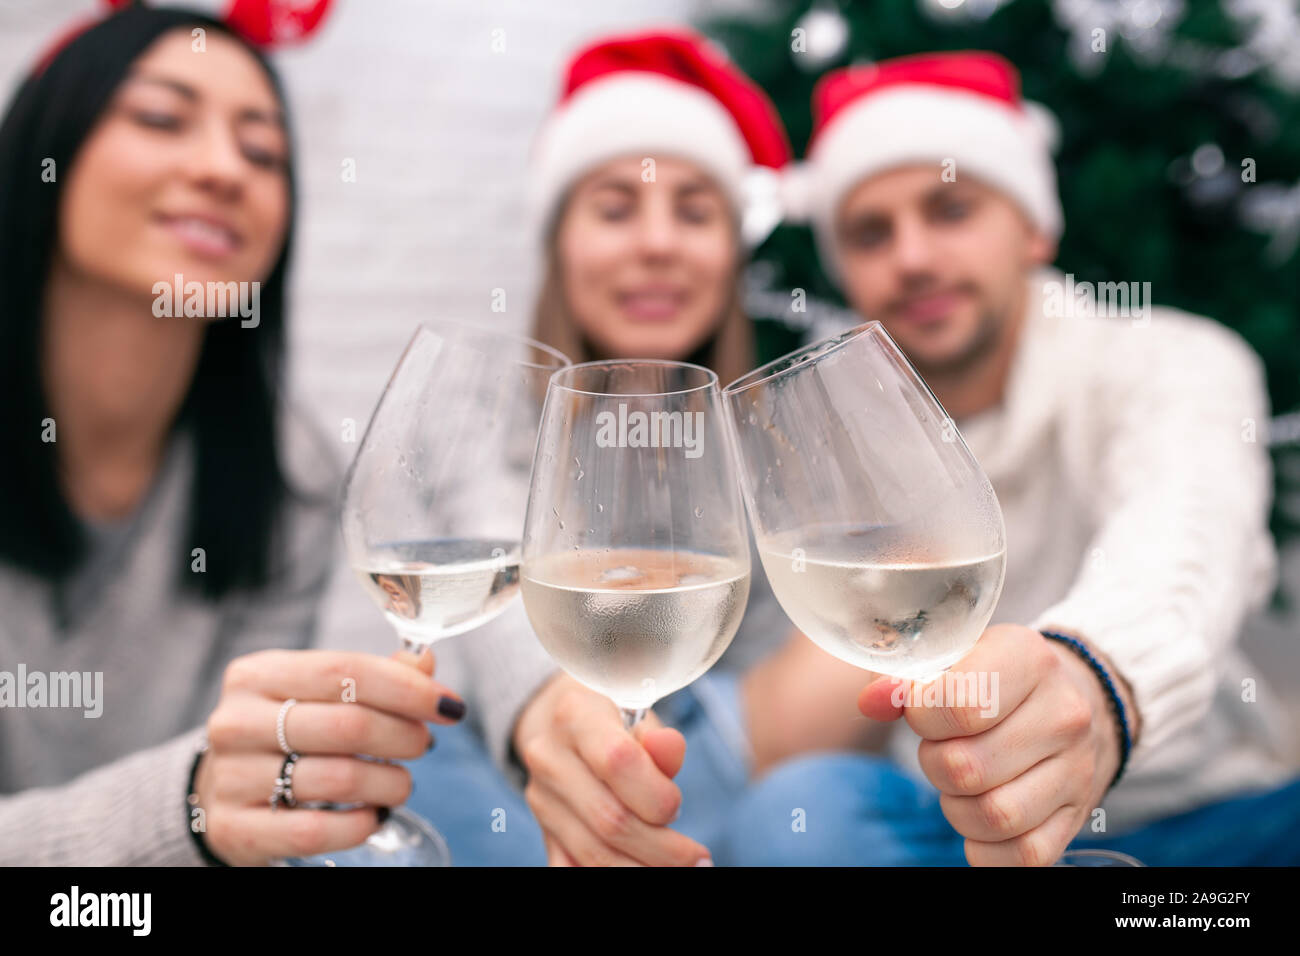 Happy friends celebrating New Year in home interior in Christmas hats sitting near a Christmas tree with glasses of wine. Wine glasses are the focus. Stock Photo